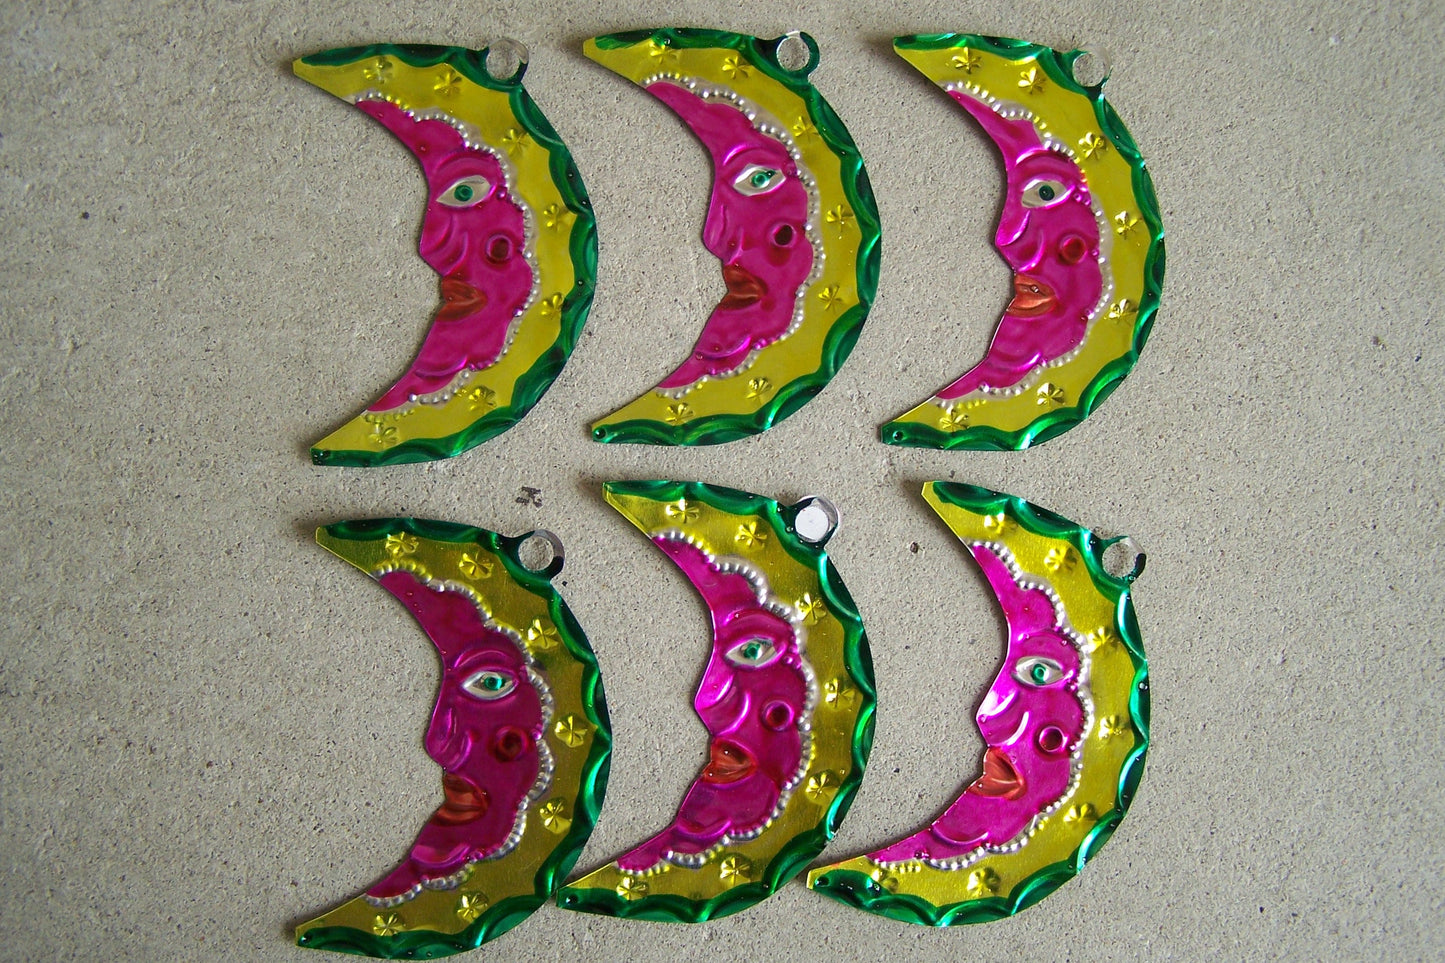 Lot of 6 Tin Painted Crescent Moon Ornaments - Watermelon Colored - Mexico